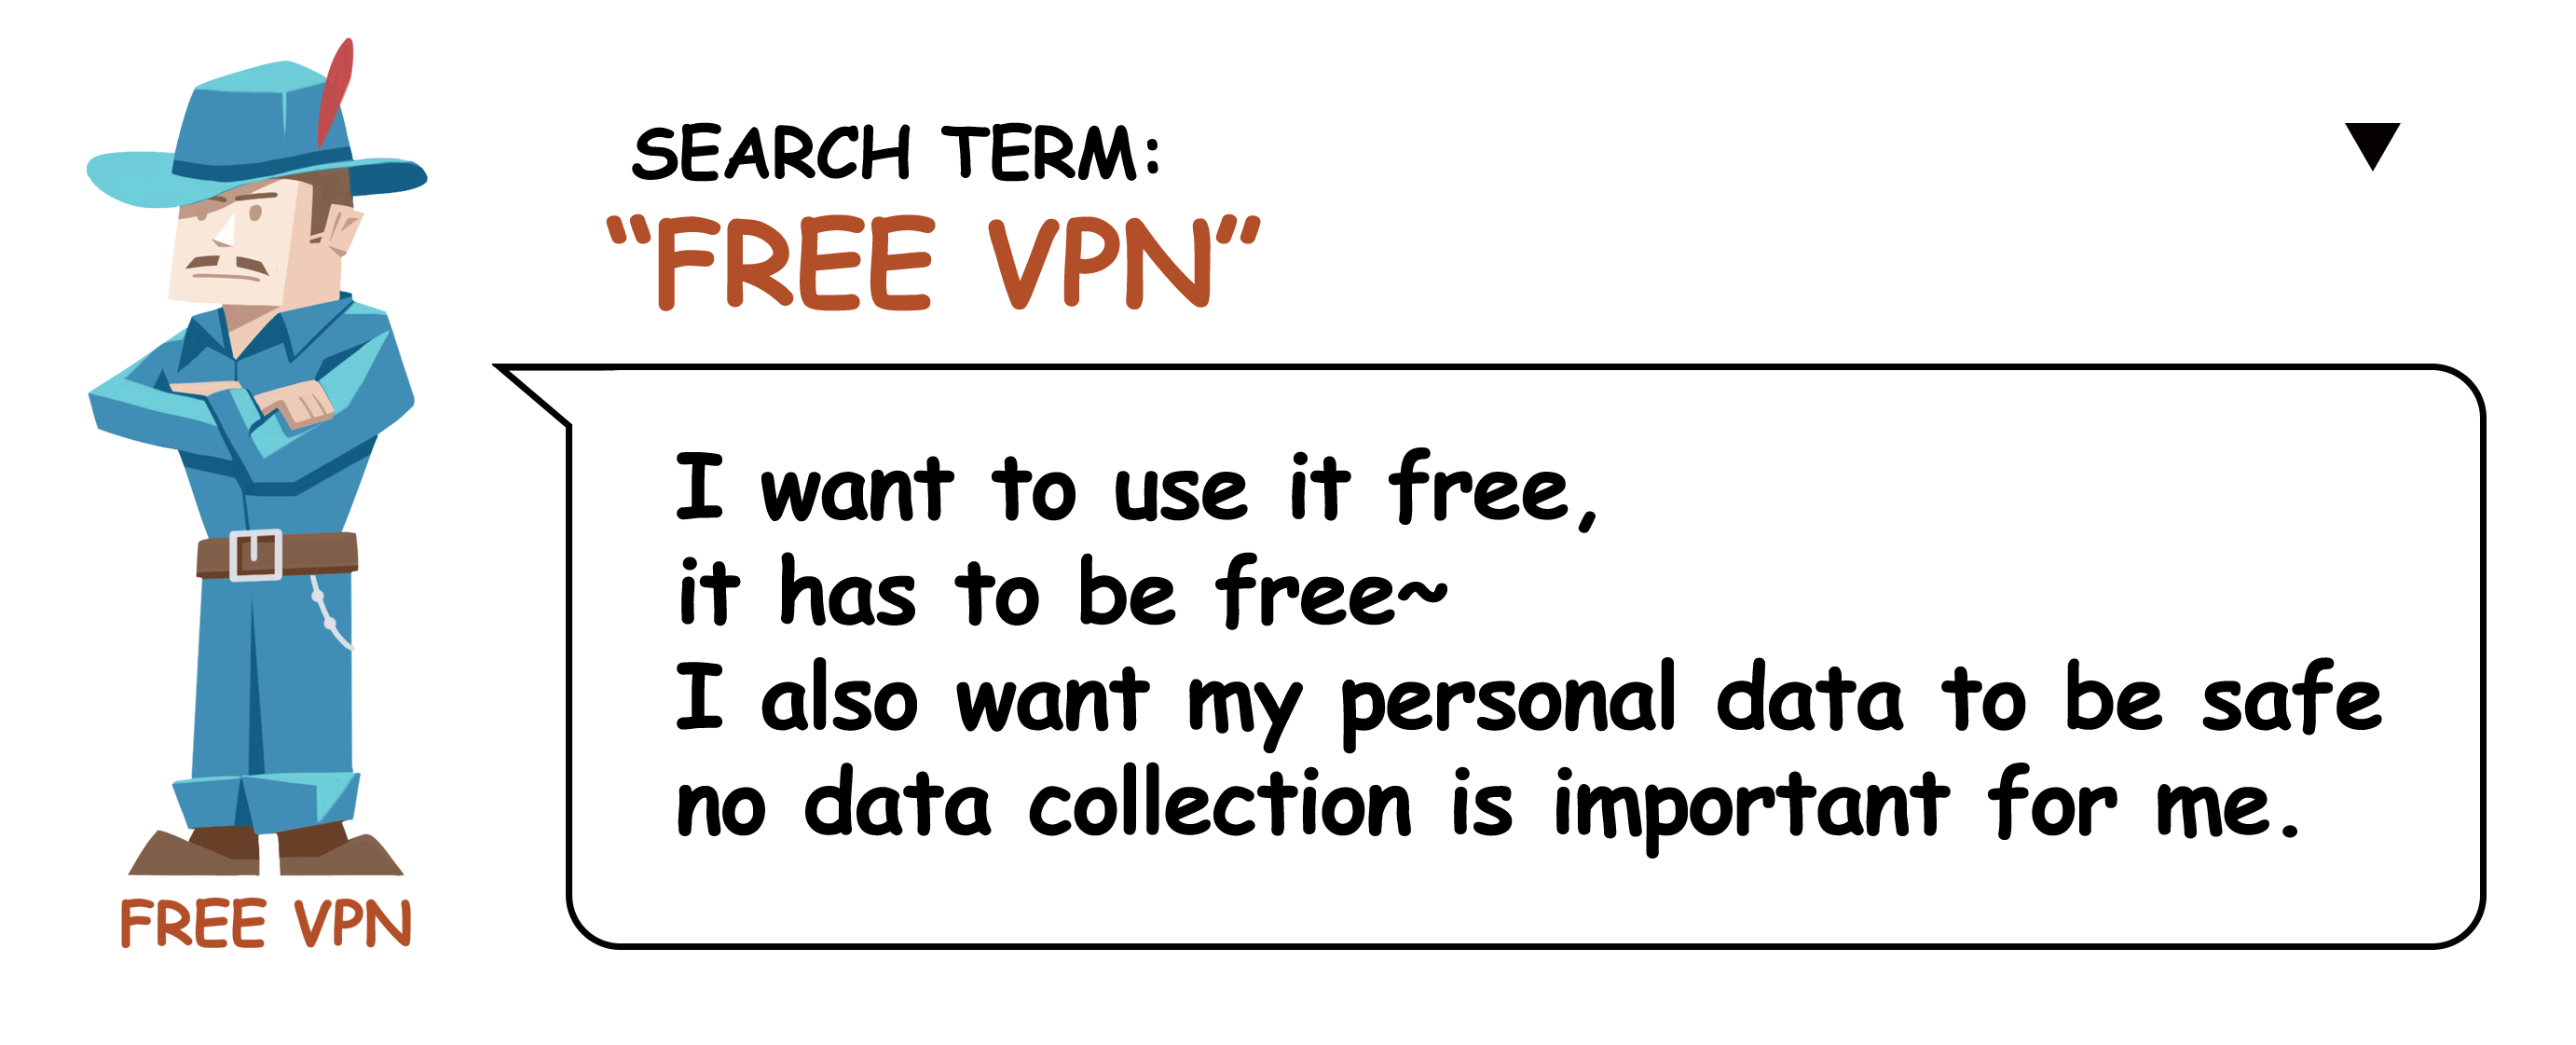 when you search for a free VPN